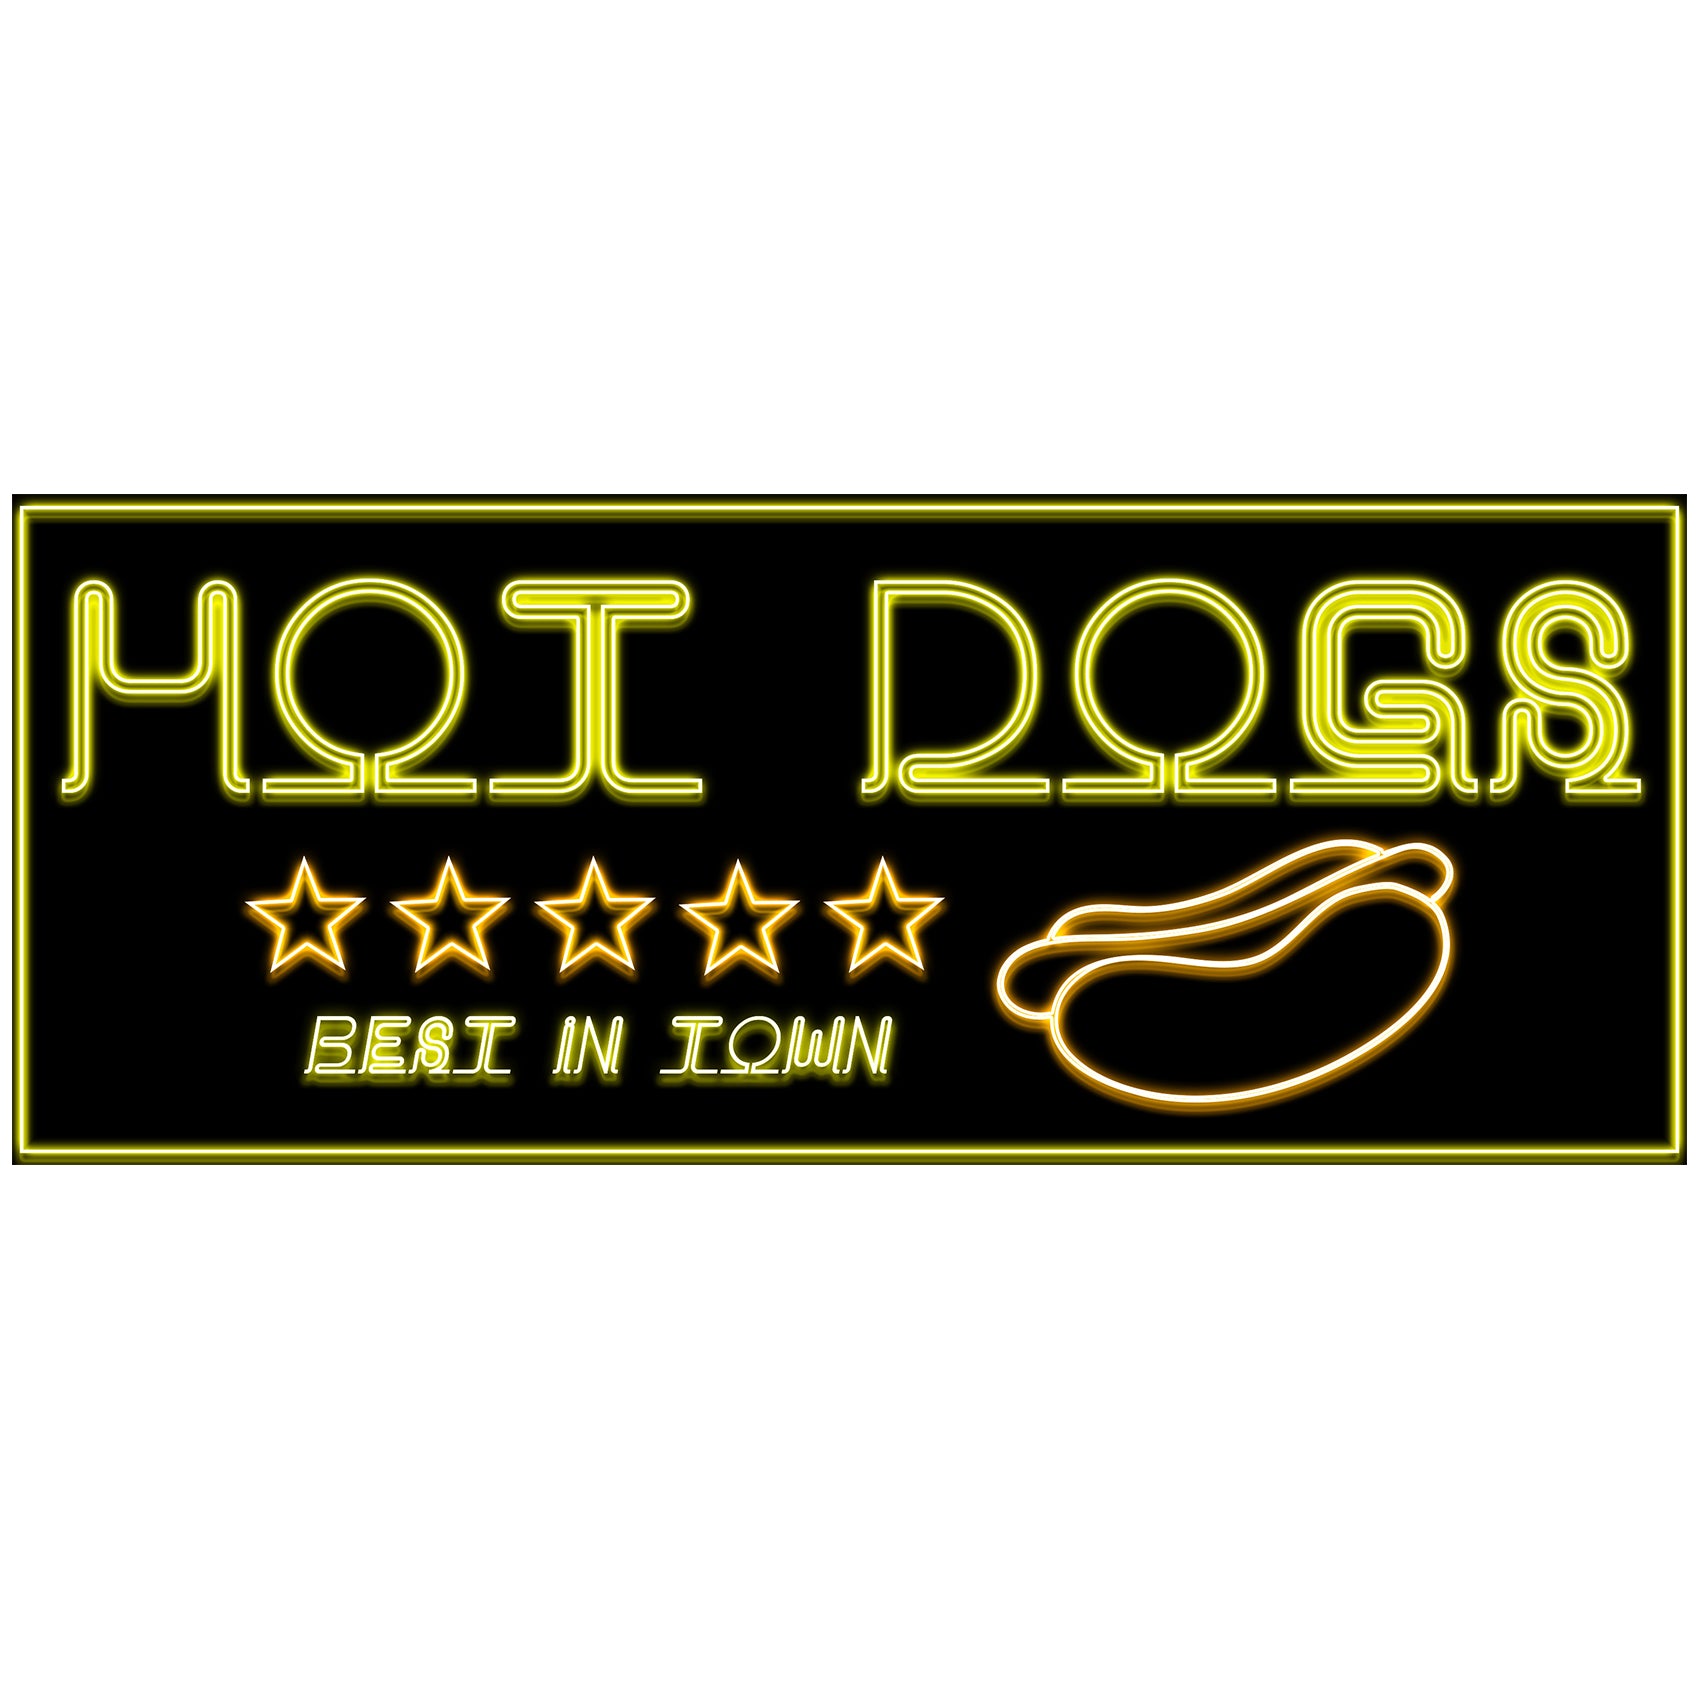 Hot Dogs Prepasted Neon Food Sign Cutout Wall Mural 20x8inch